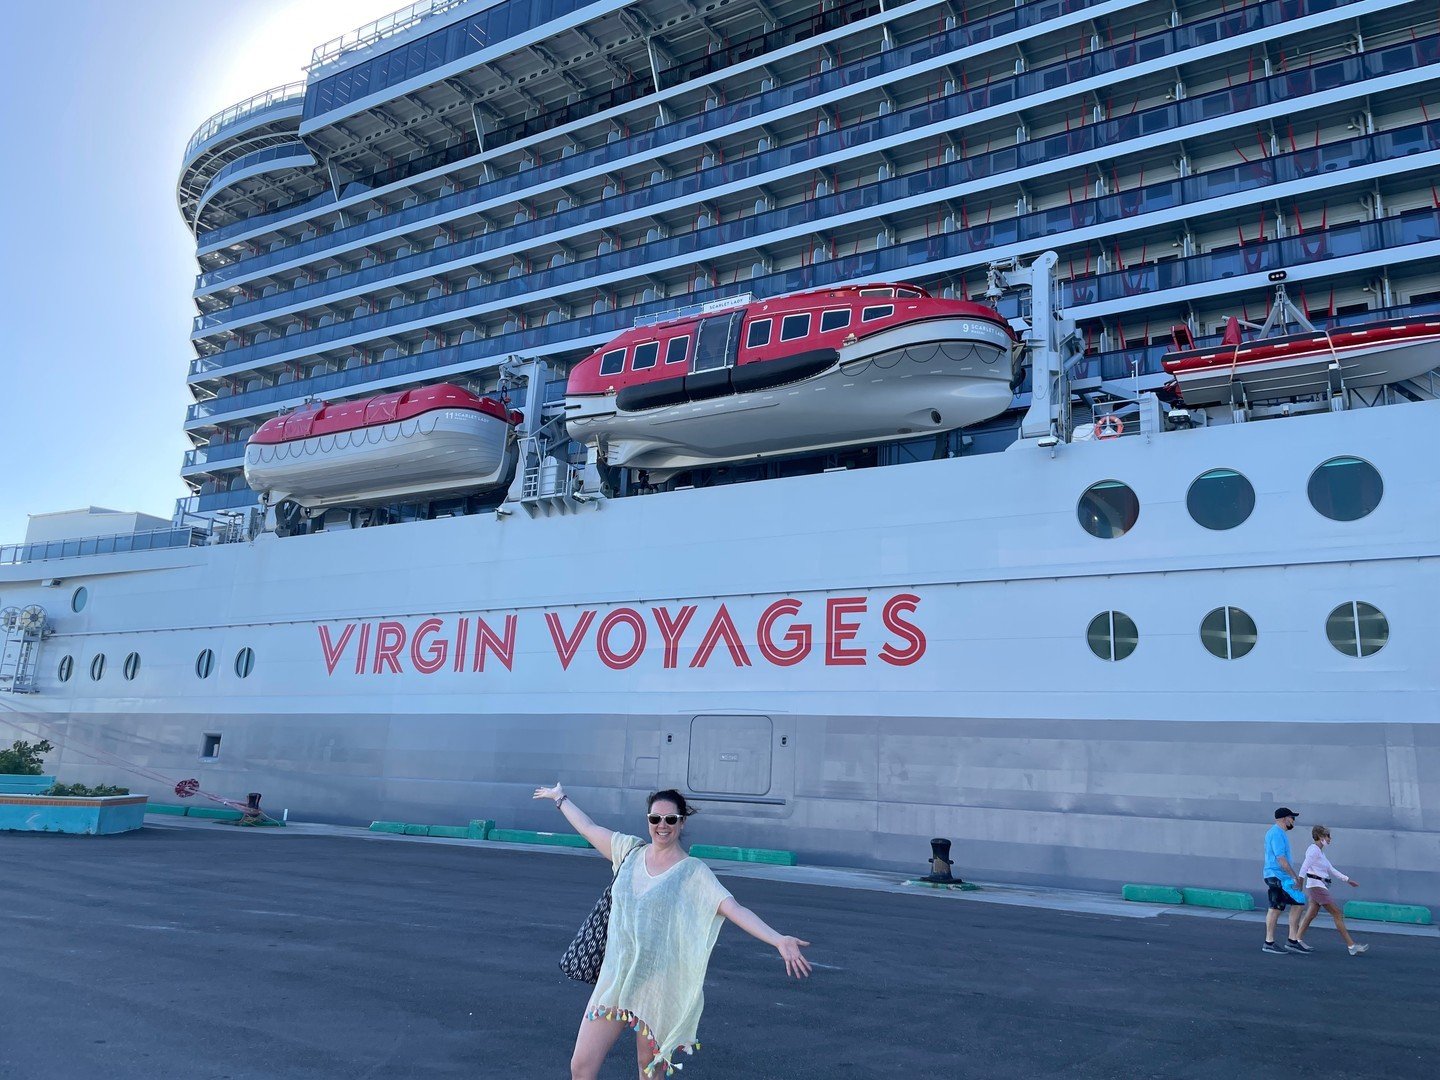 Virgin Voyages: An Adults-Only Paradise!

If you've ever wondered what it's like to embark on a cruise with Virgin Voyages, here are some highlights for an unforgettable voyage.

- 18+ only = ultimate relaxation &amp; fun for grown-ups
- Pre-book din